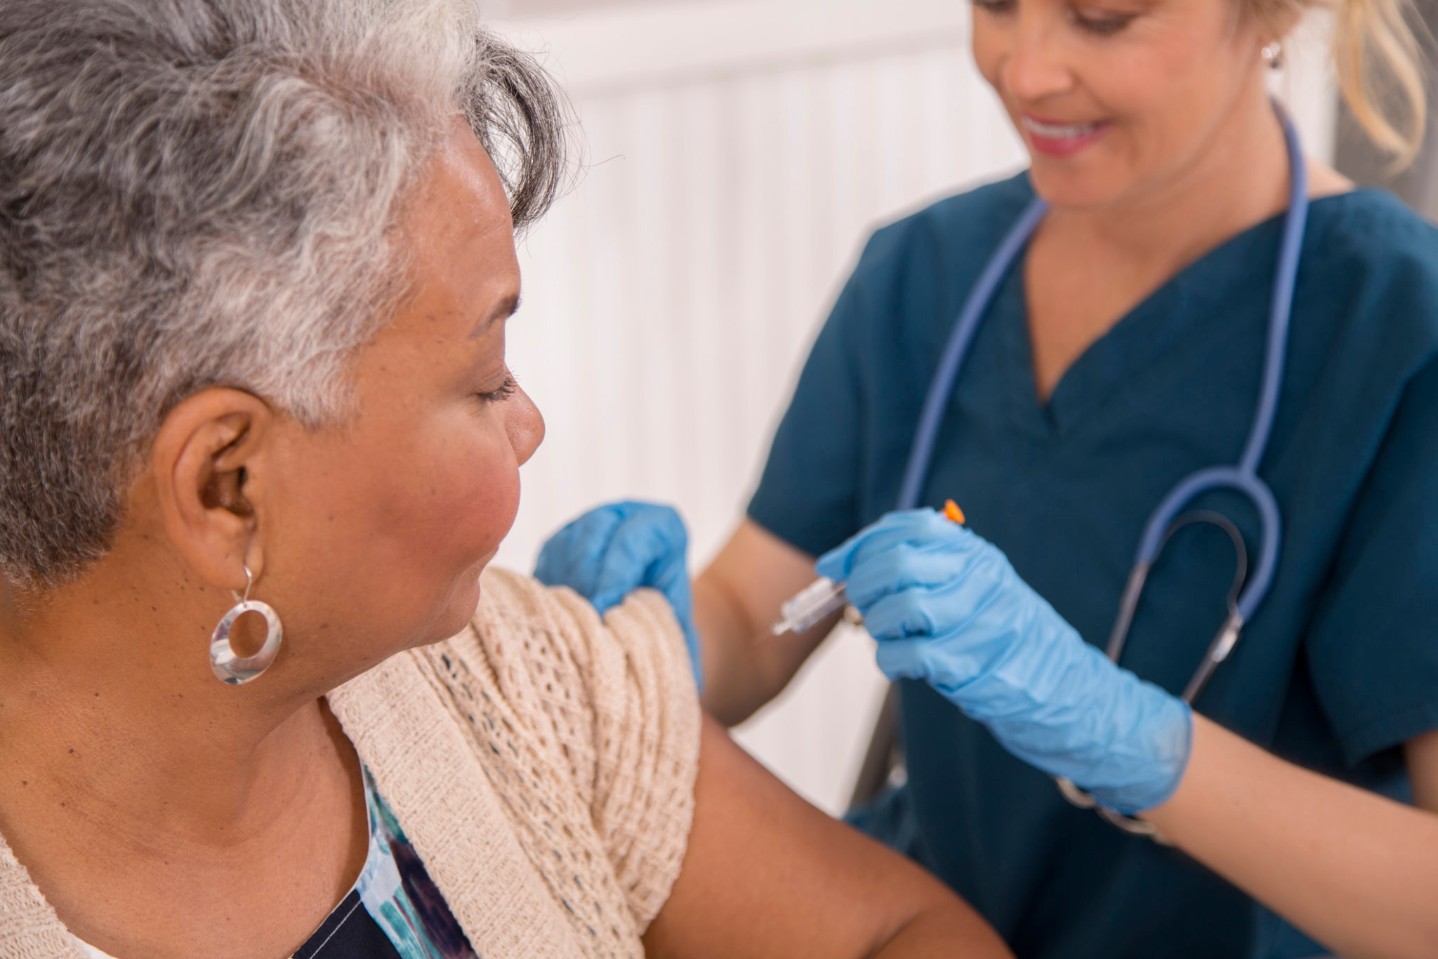 Nurse gives flu vaccine to senior adult patient at clinic.